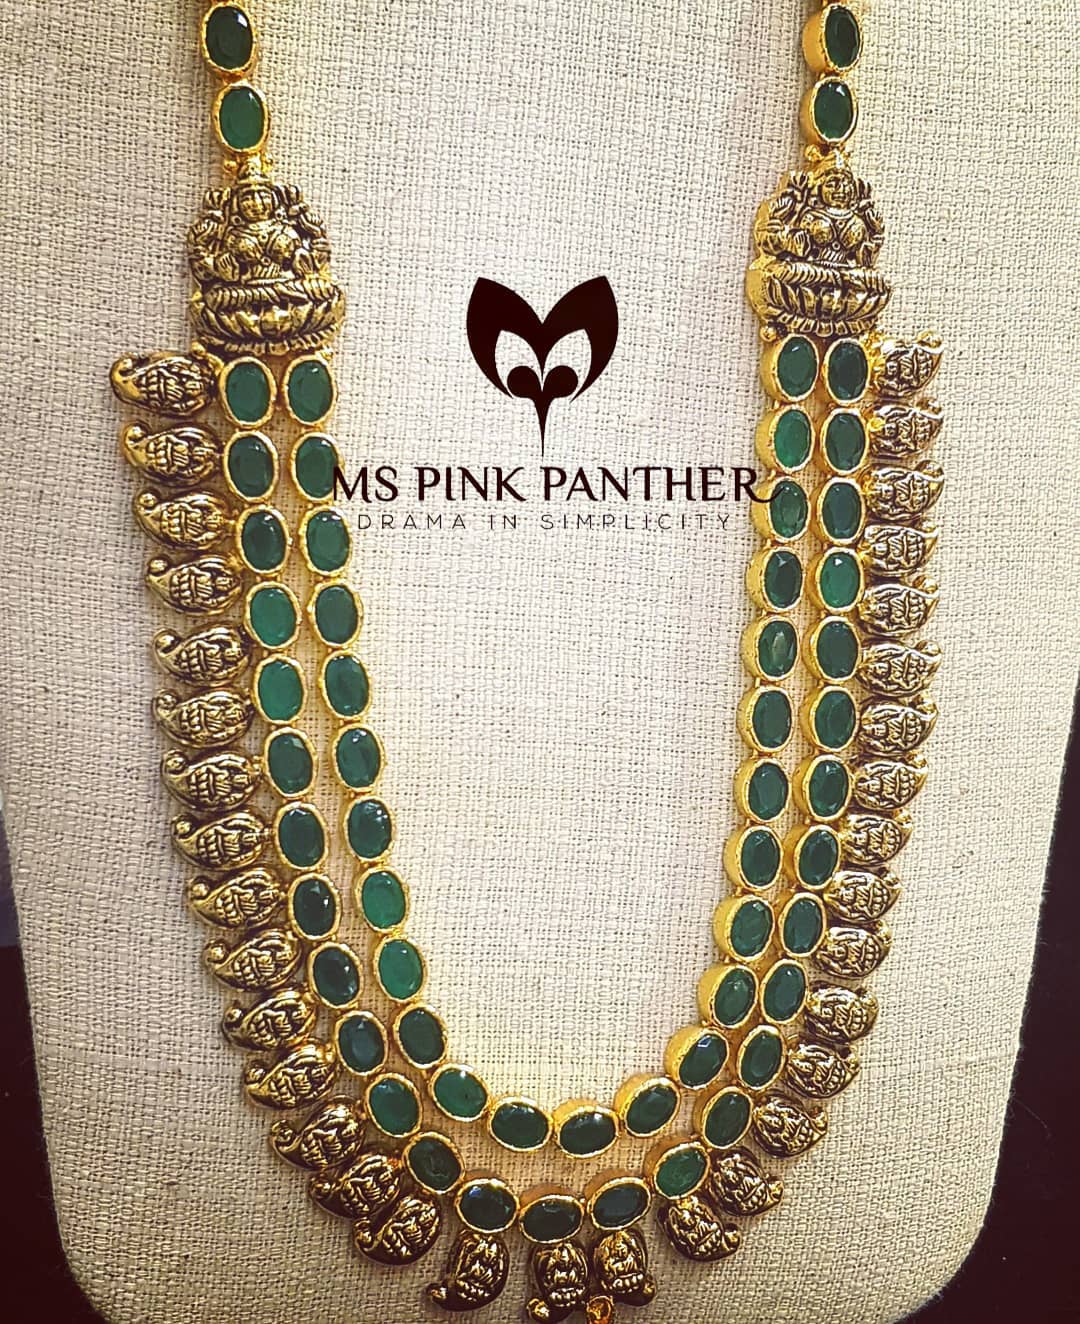 Temple Layer Necklace From Ms Pink Panthers